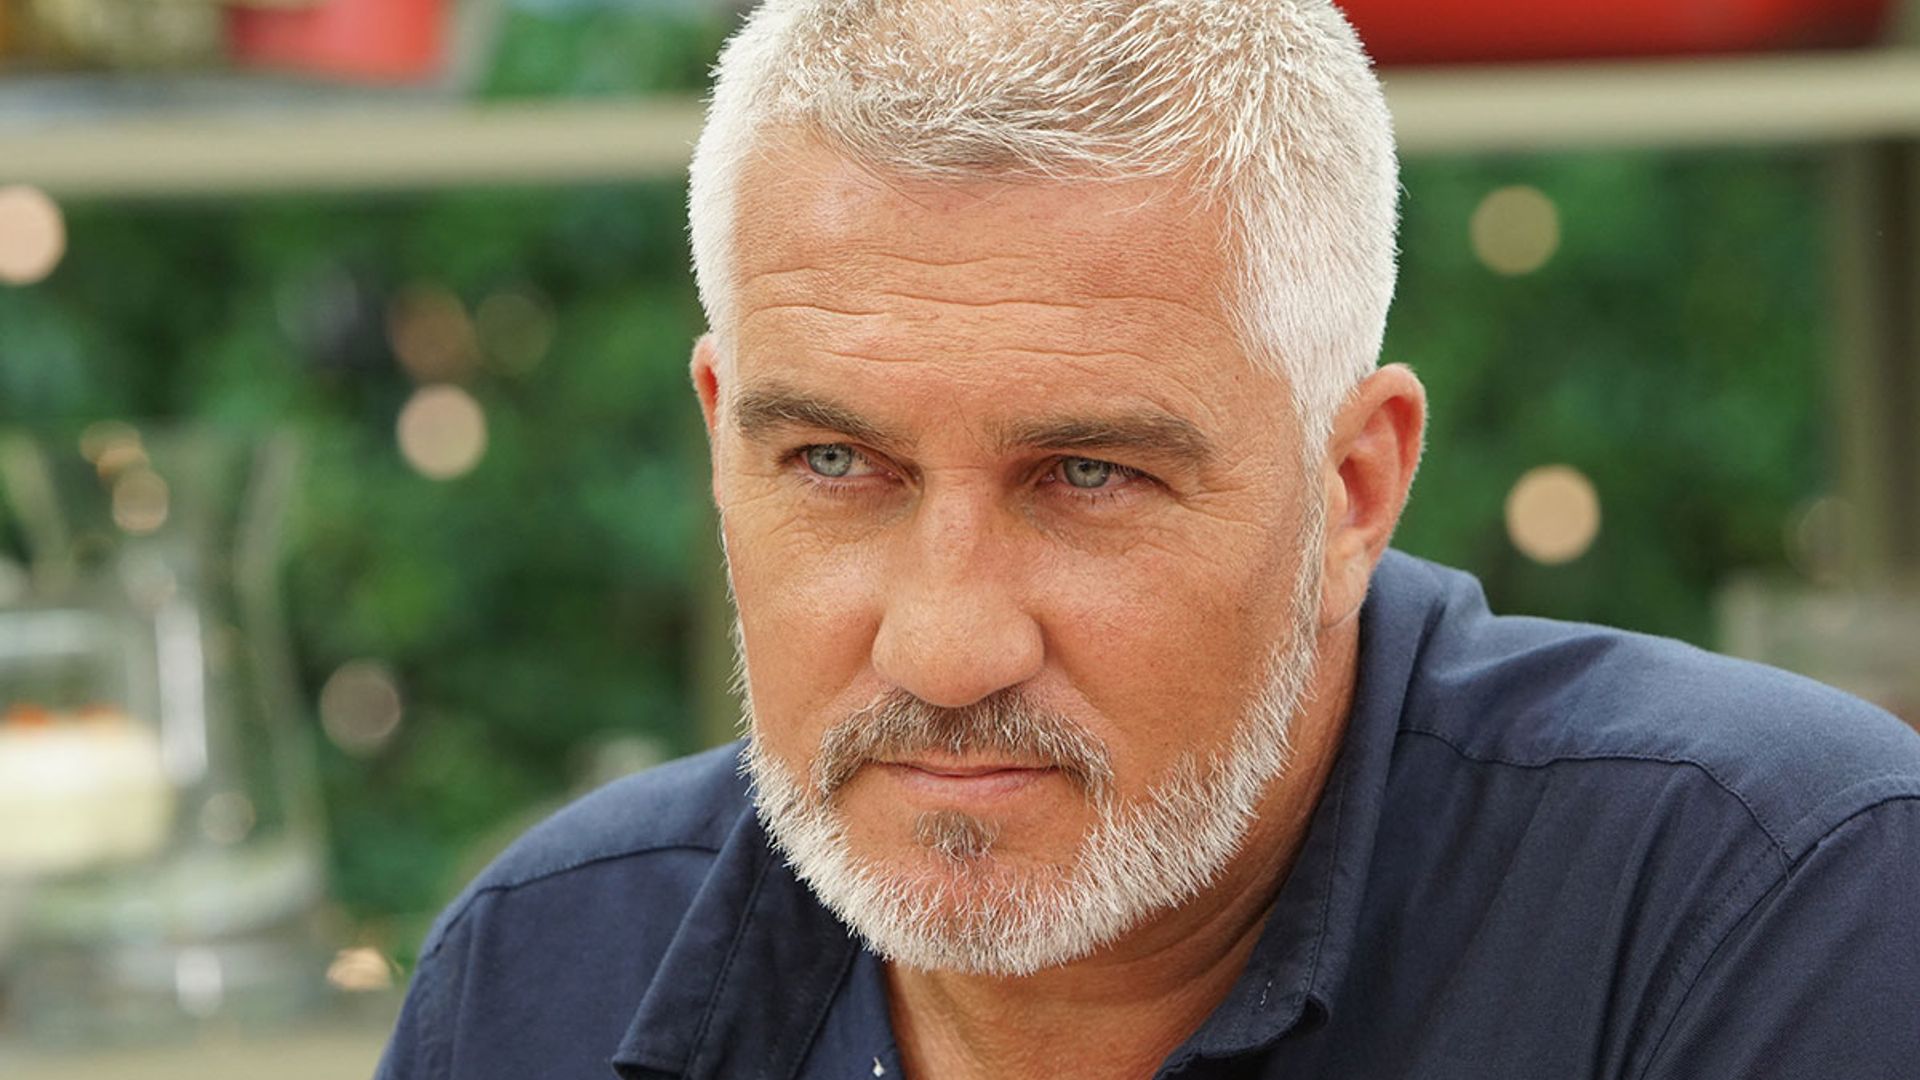 GBBO's Paul Hollywood's secrets to losing a stone revealed - see photo